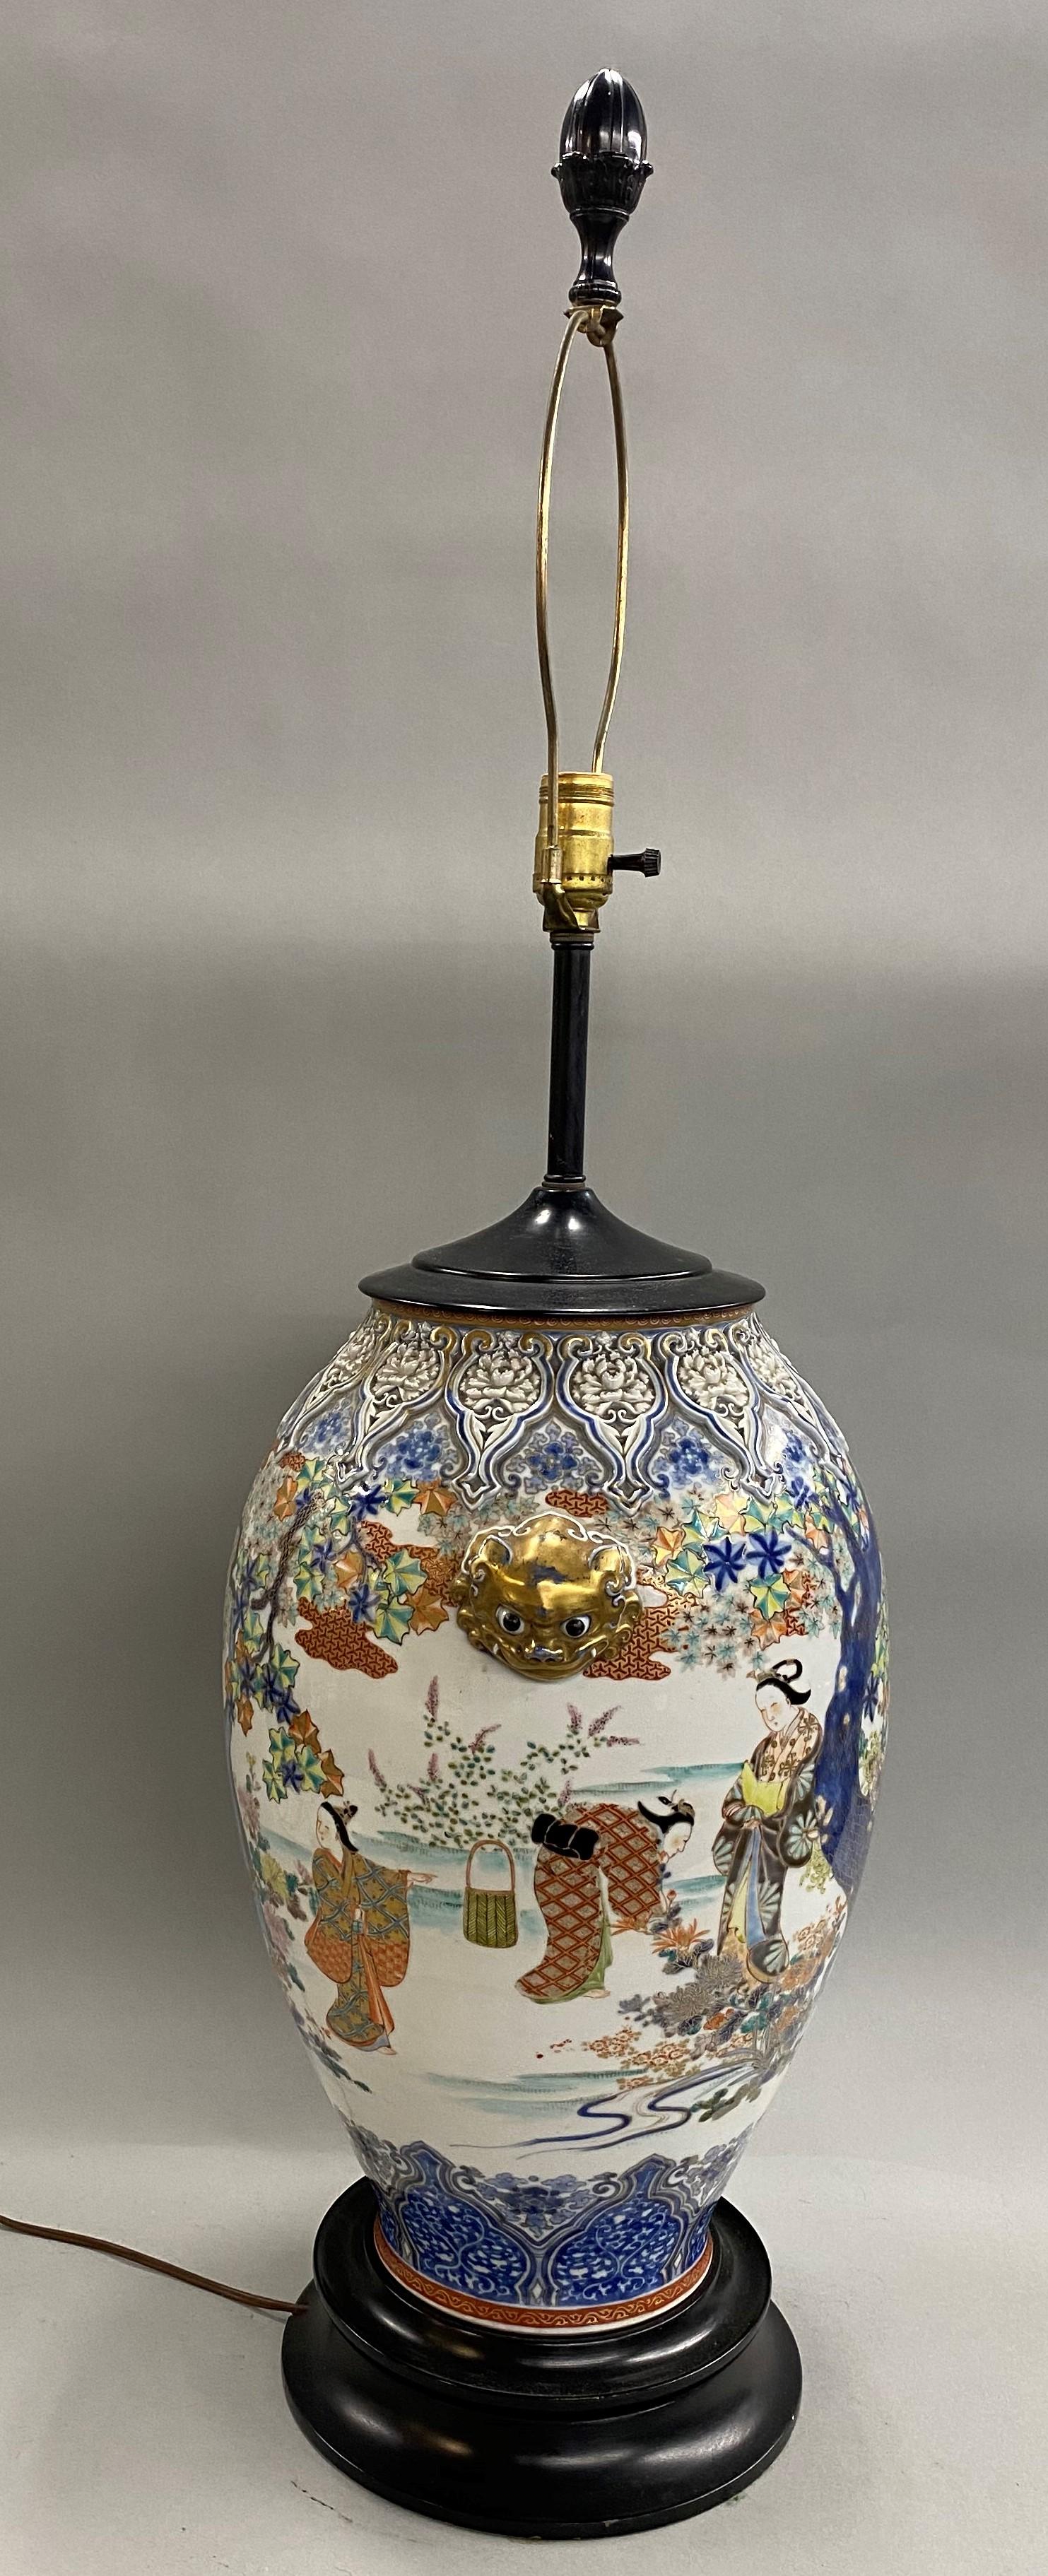 Polychromed 19th C Chinese Polychrome Porcelain Vase Converted to Lamp with Foo Dog Handles